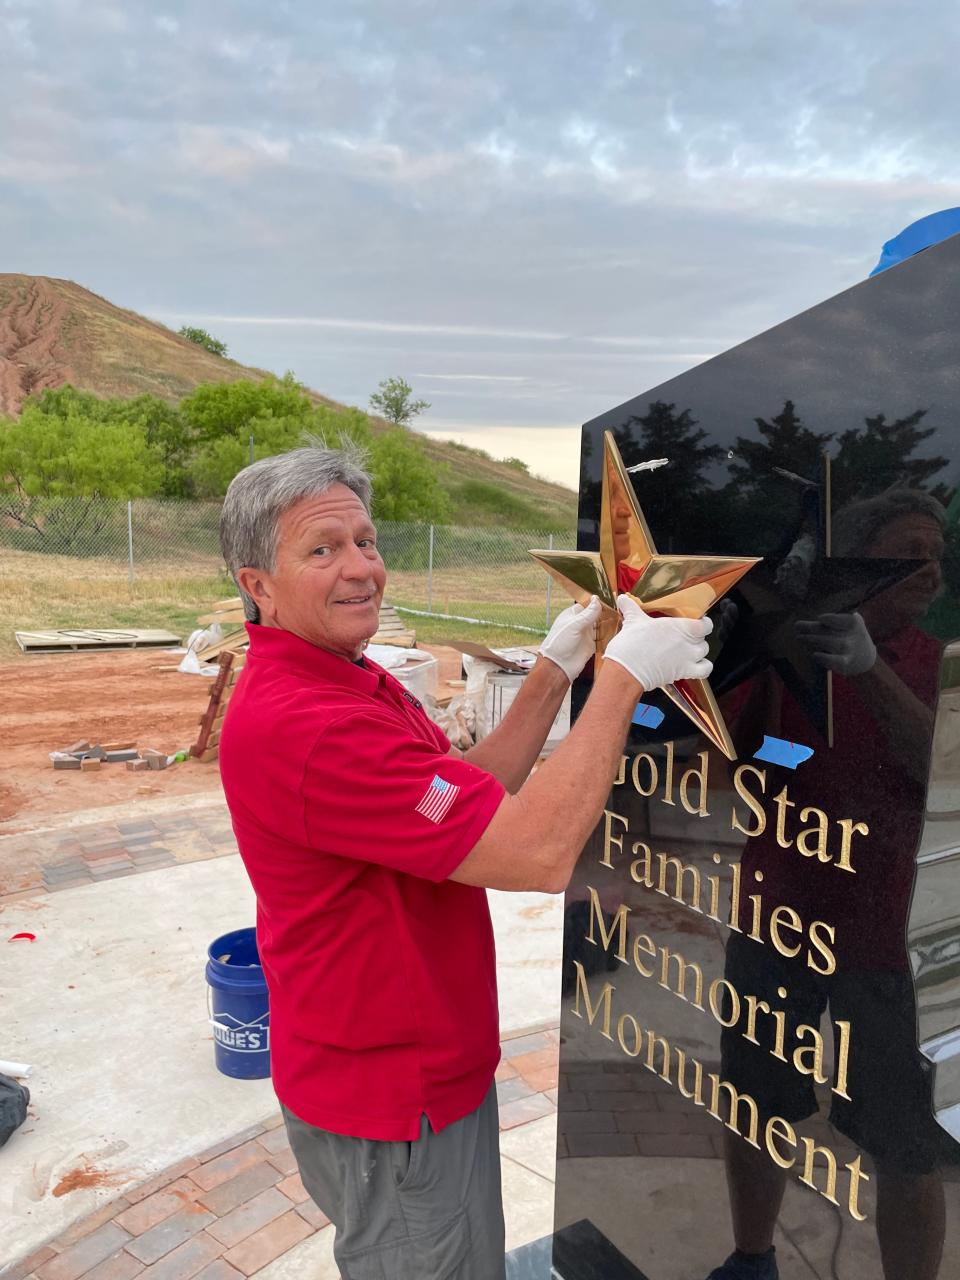 David Coleman, chairman of the Lake Wichita Revitalization Committee, hangs the star on the Gold Star Families monument at the veterans memorial at Lake Wichita.